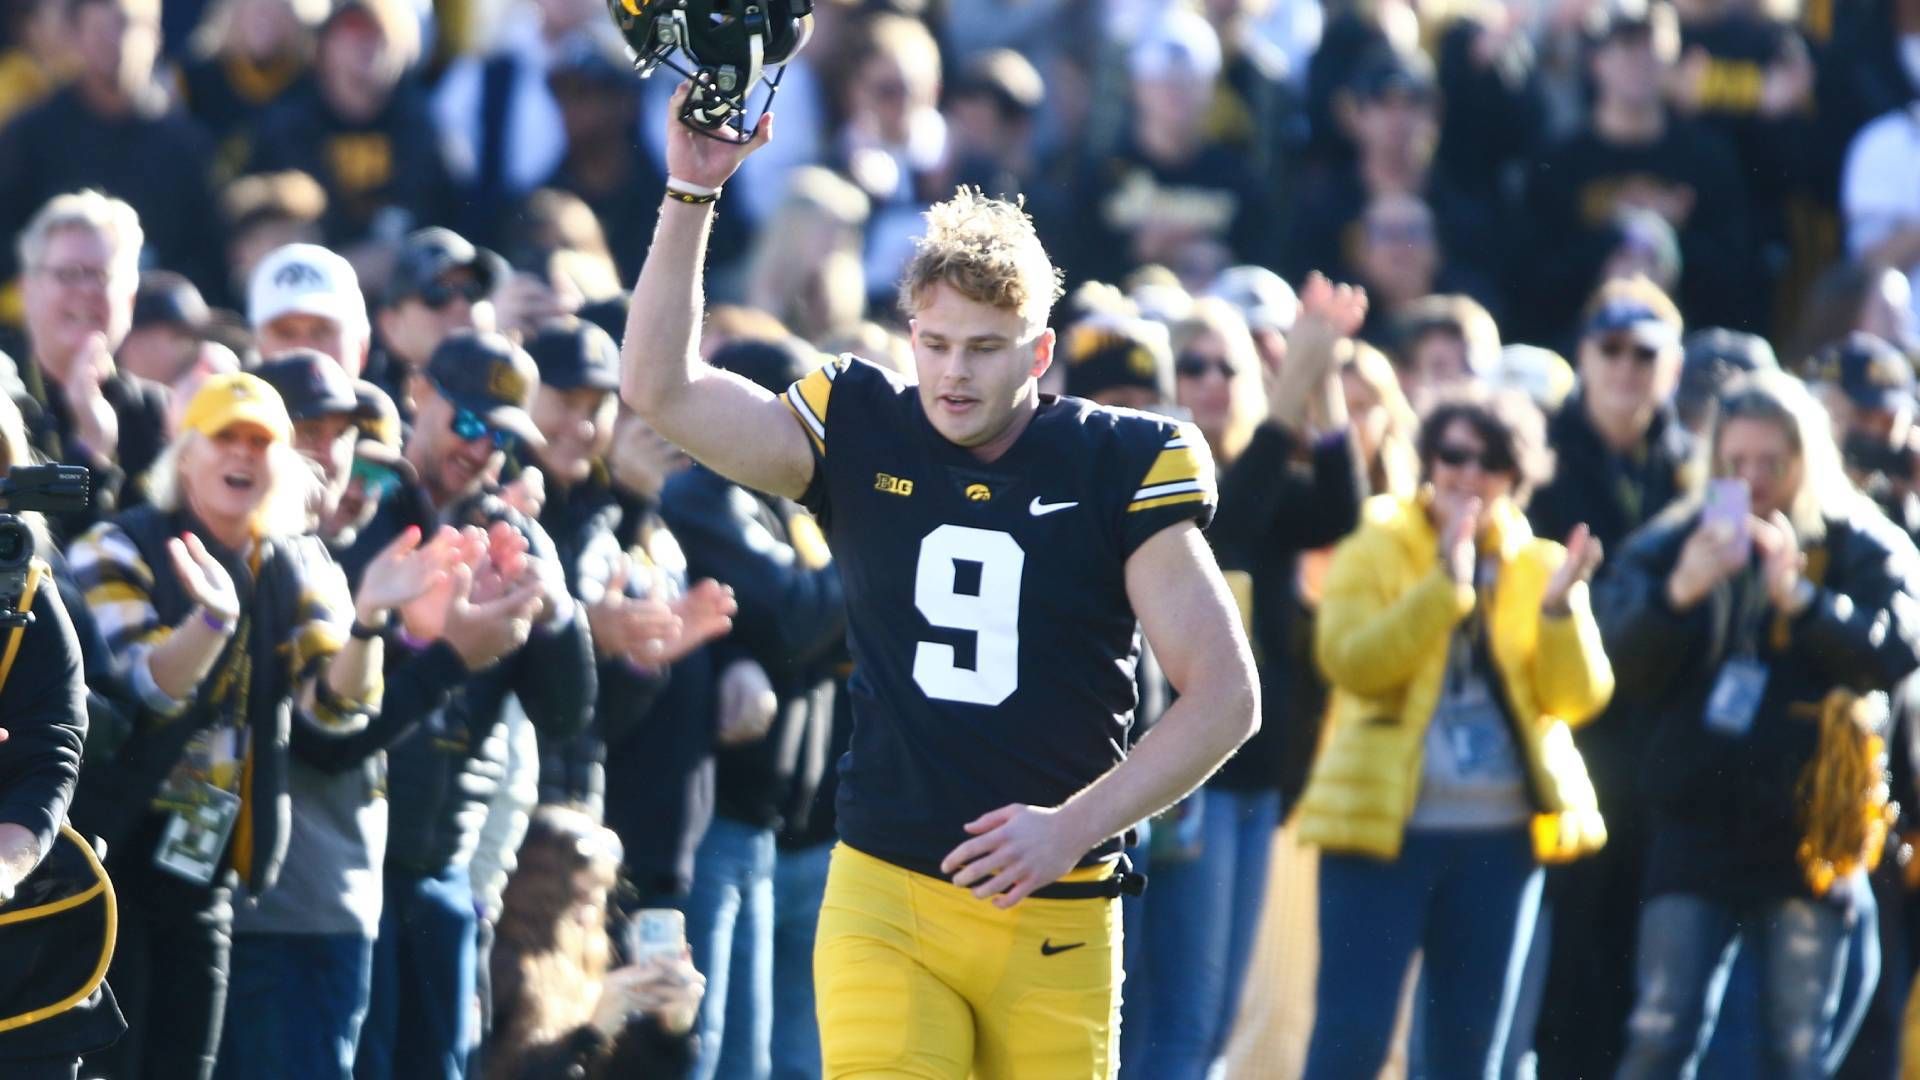 'Lost for words': Aussie punter Tory Taylor joins superstar NFL Draft picks at Chicago Bears